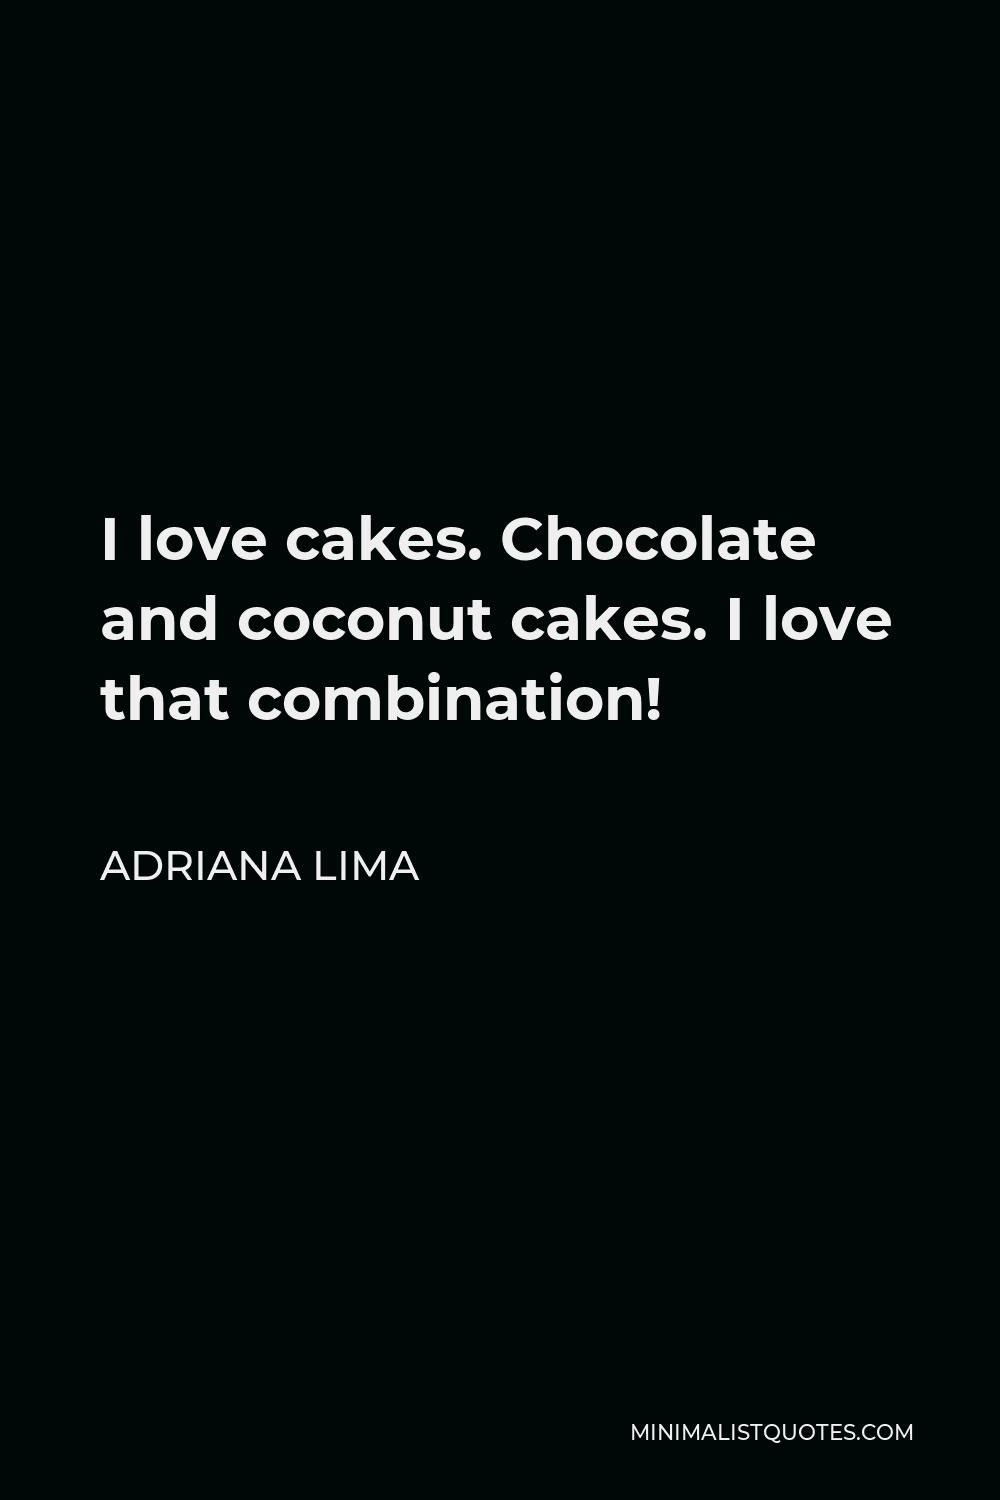 Adriana Lima Quote - I love cakes. Chocolate and coconut cakes. I love that combination!